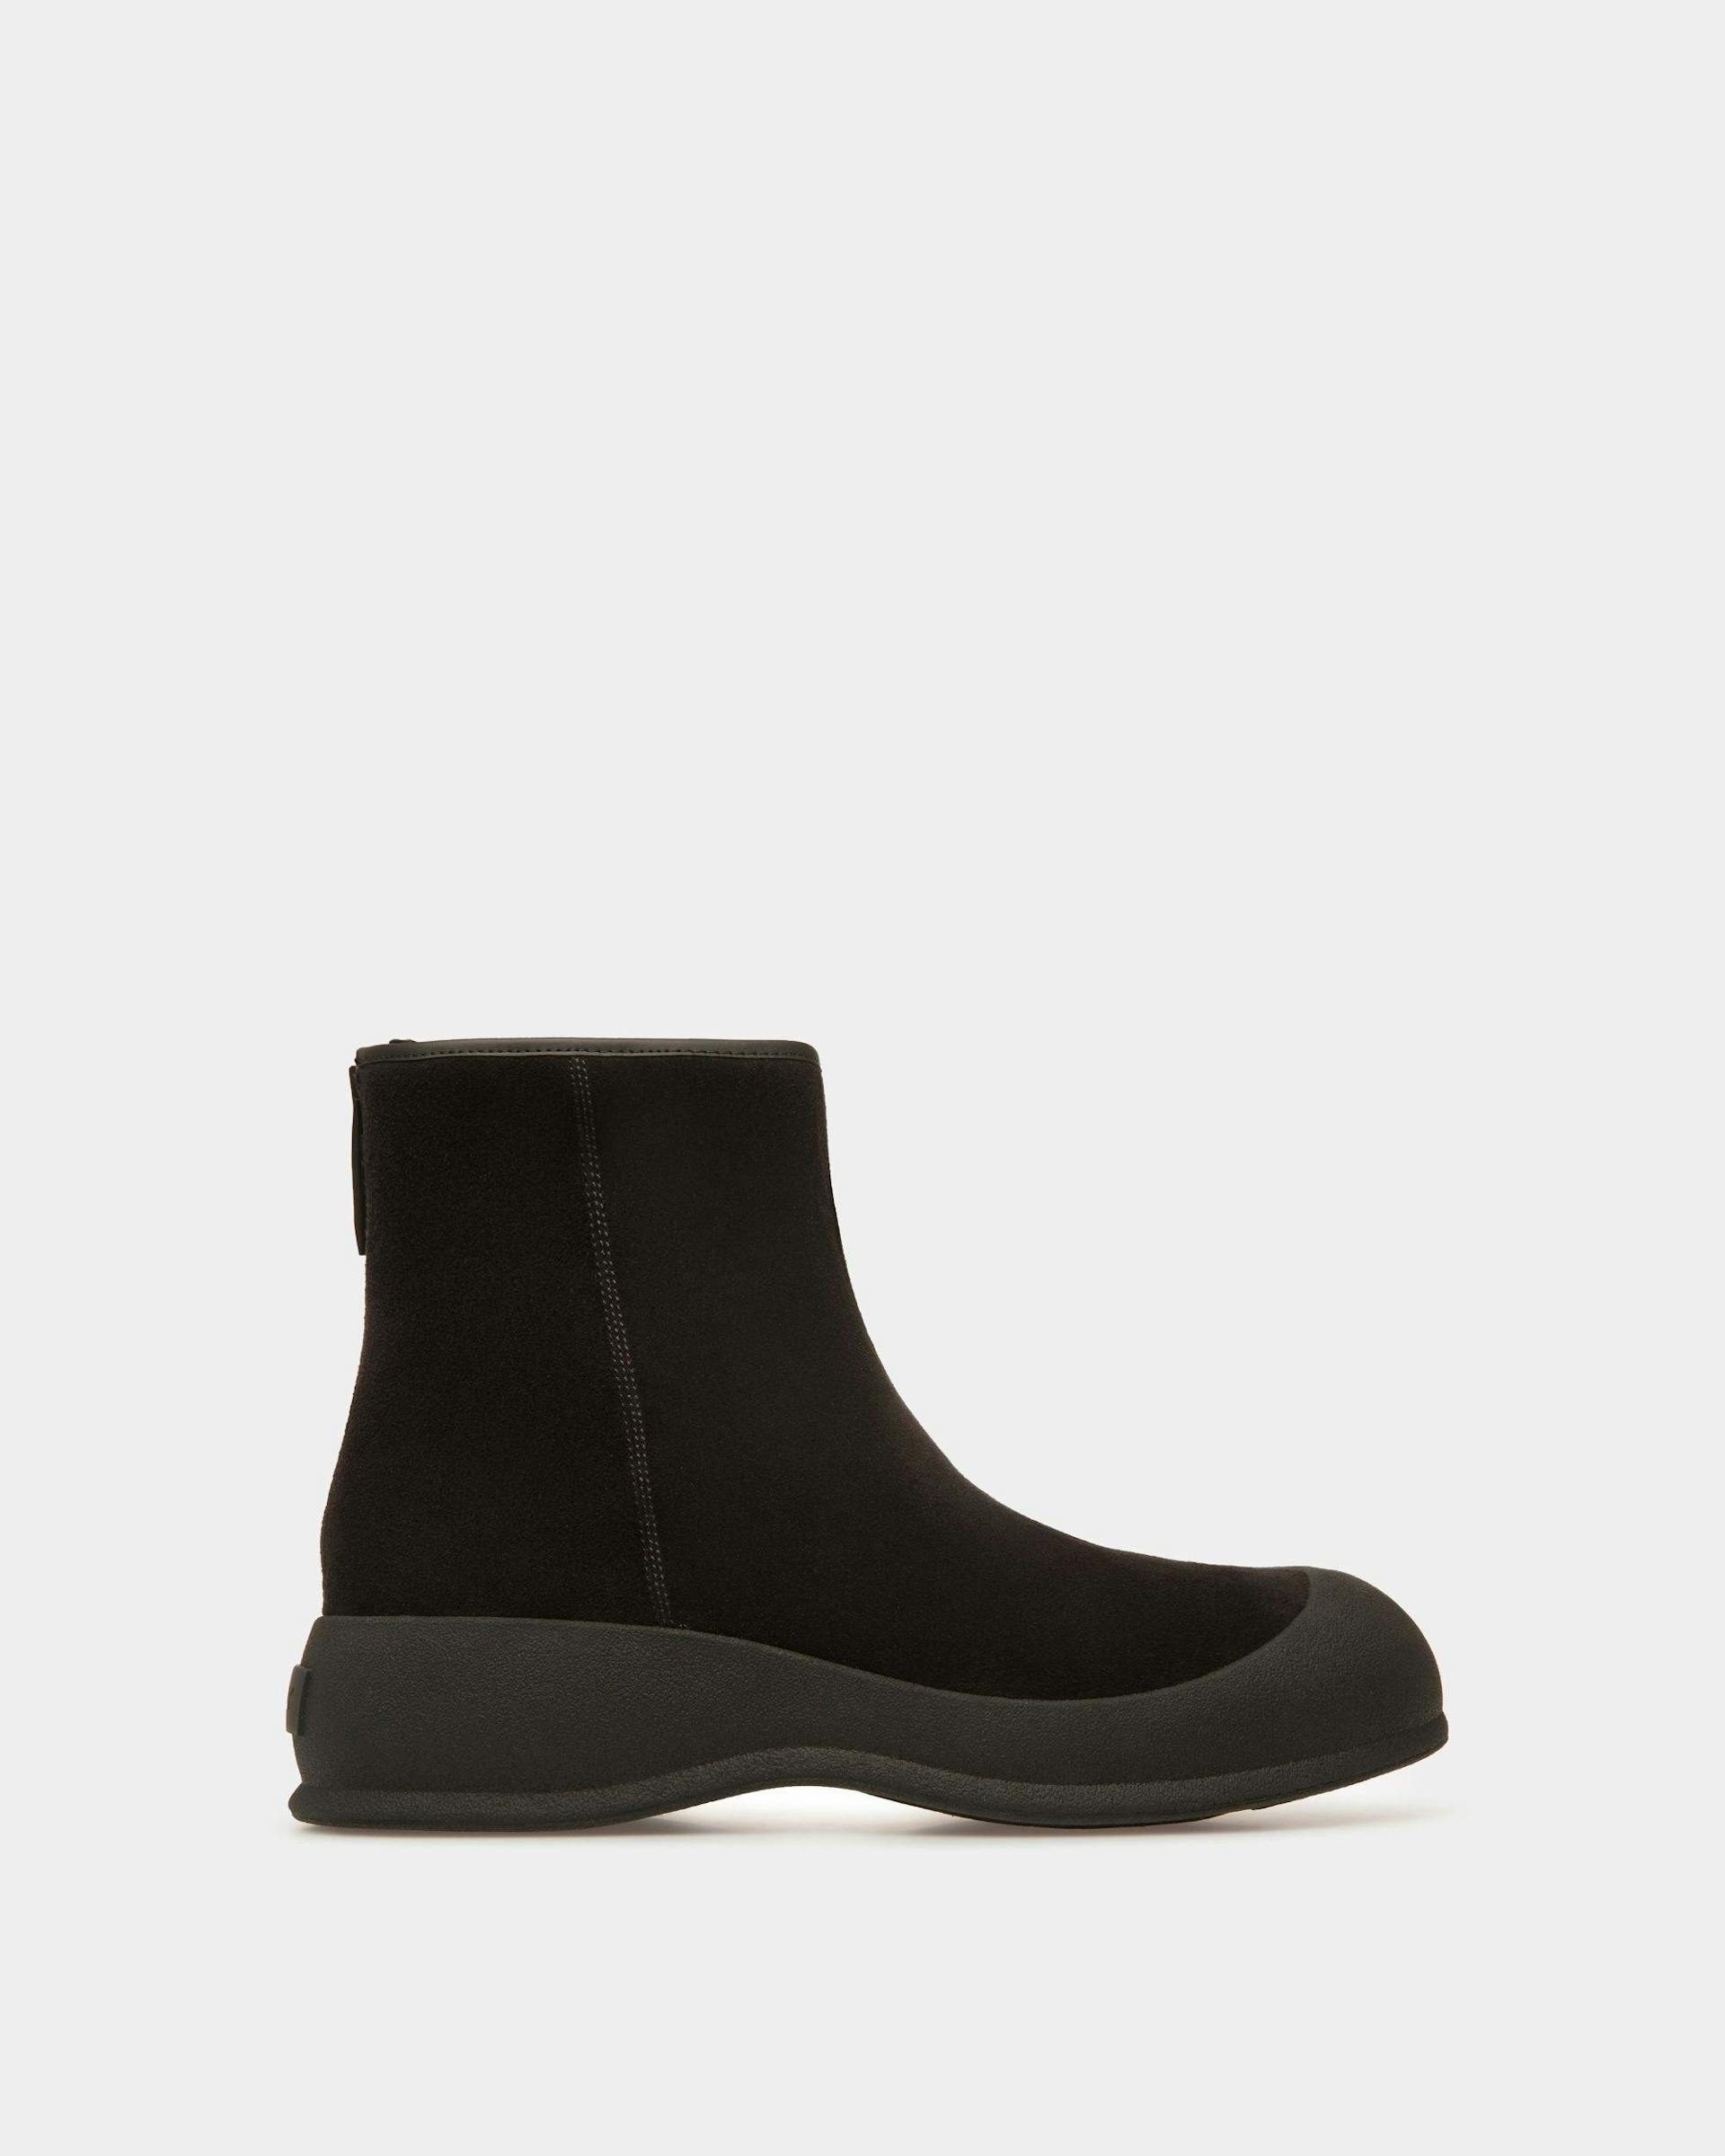 Men's Frei Snow Boots In Black Leather | Bally | Still Life Side